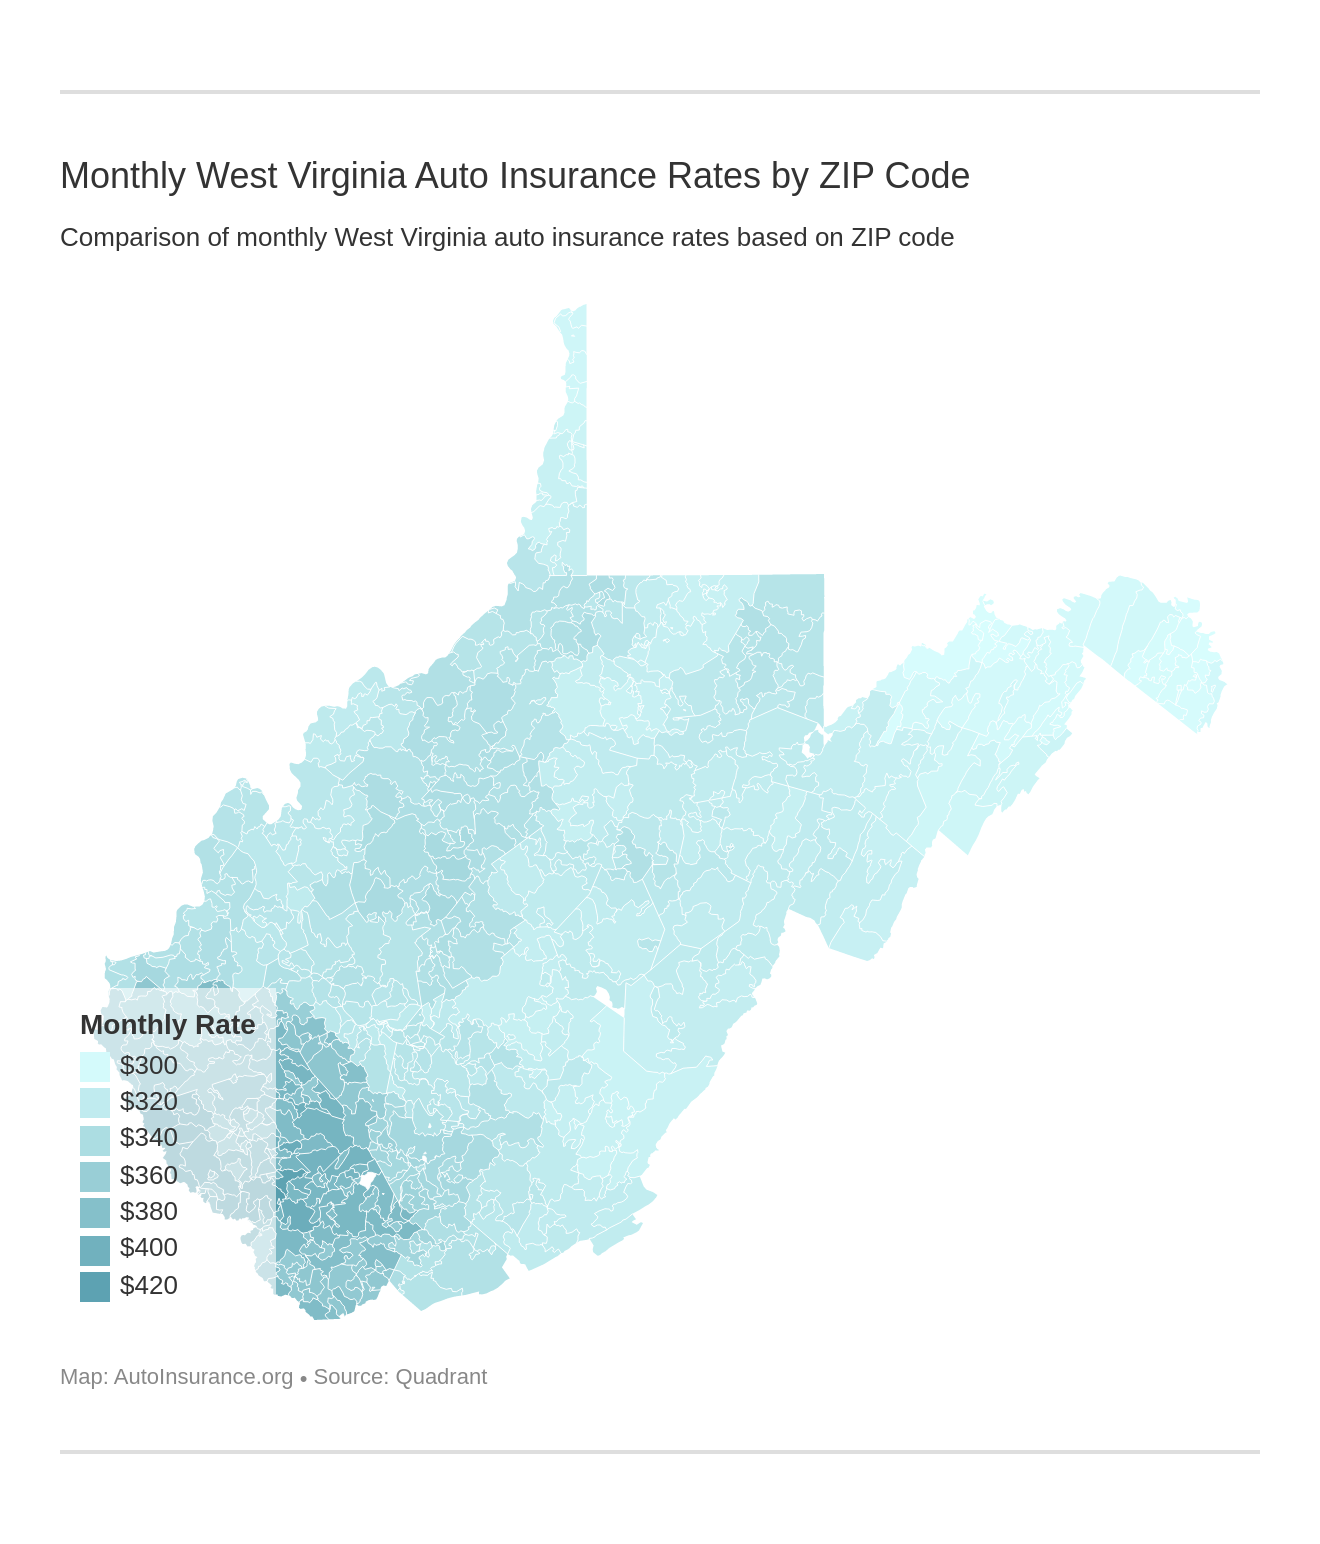 Monthly West Virginia Auto Insurance Rates by ZIP Code